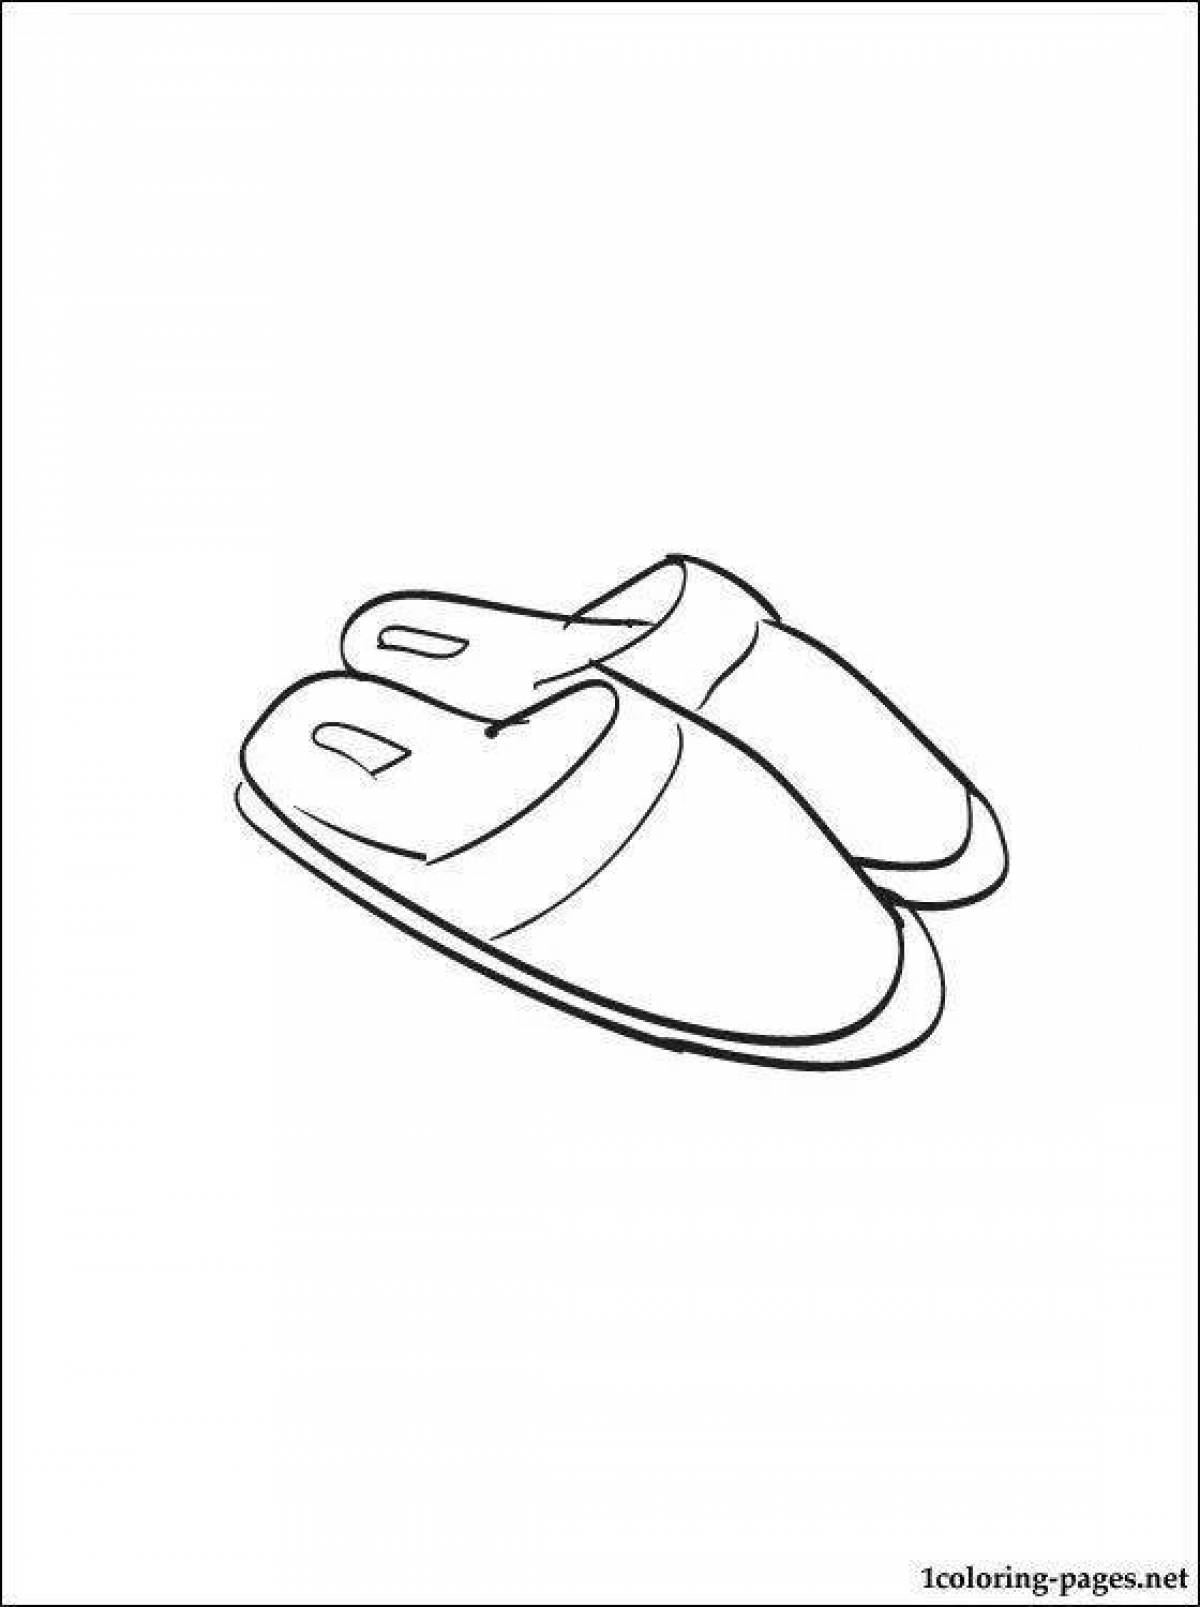 Coloring page wonderful slippers